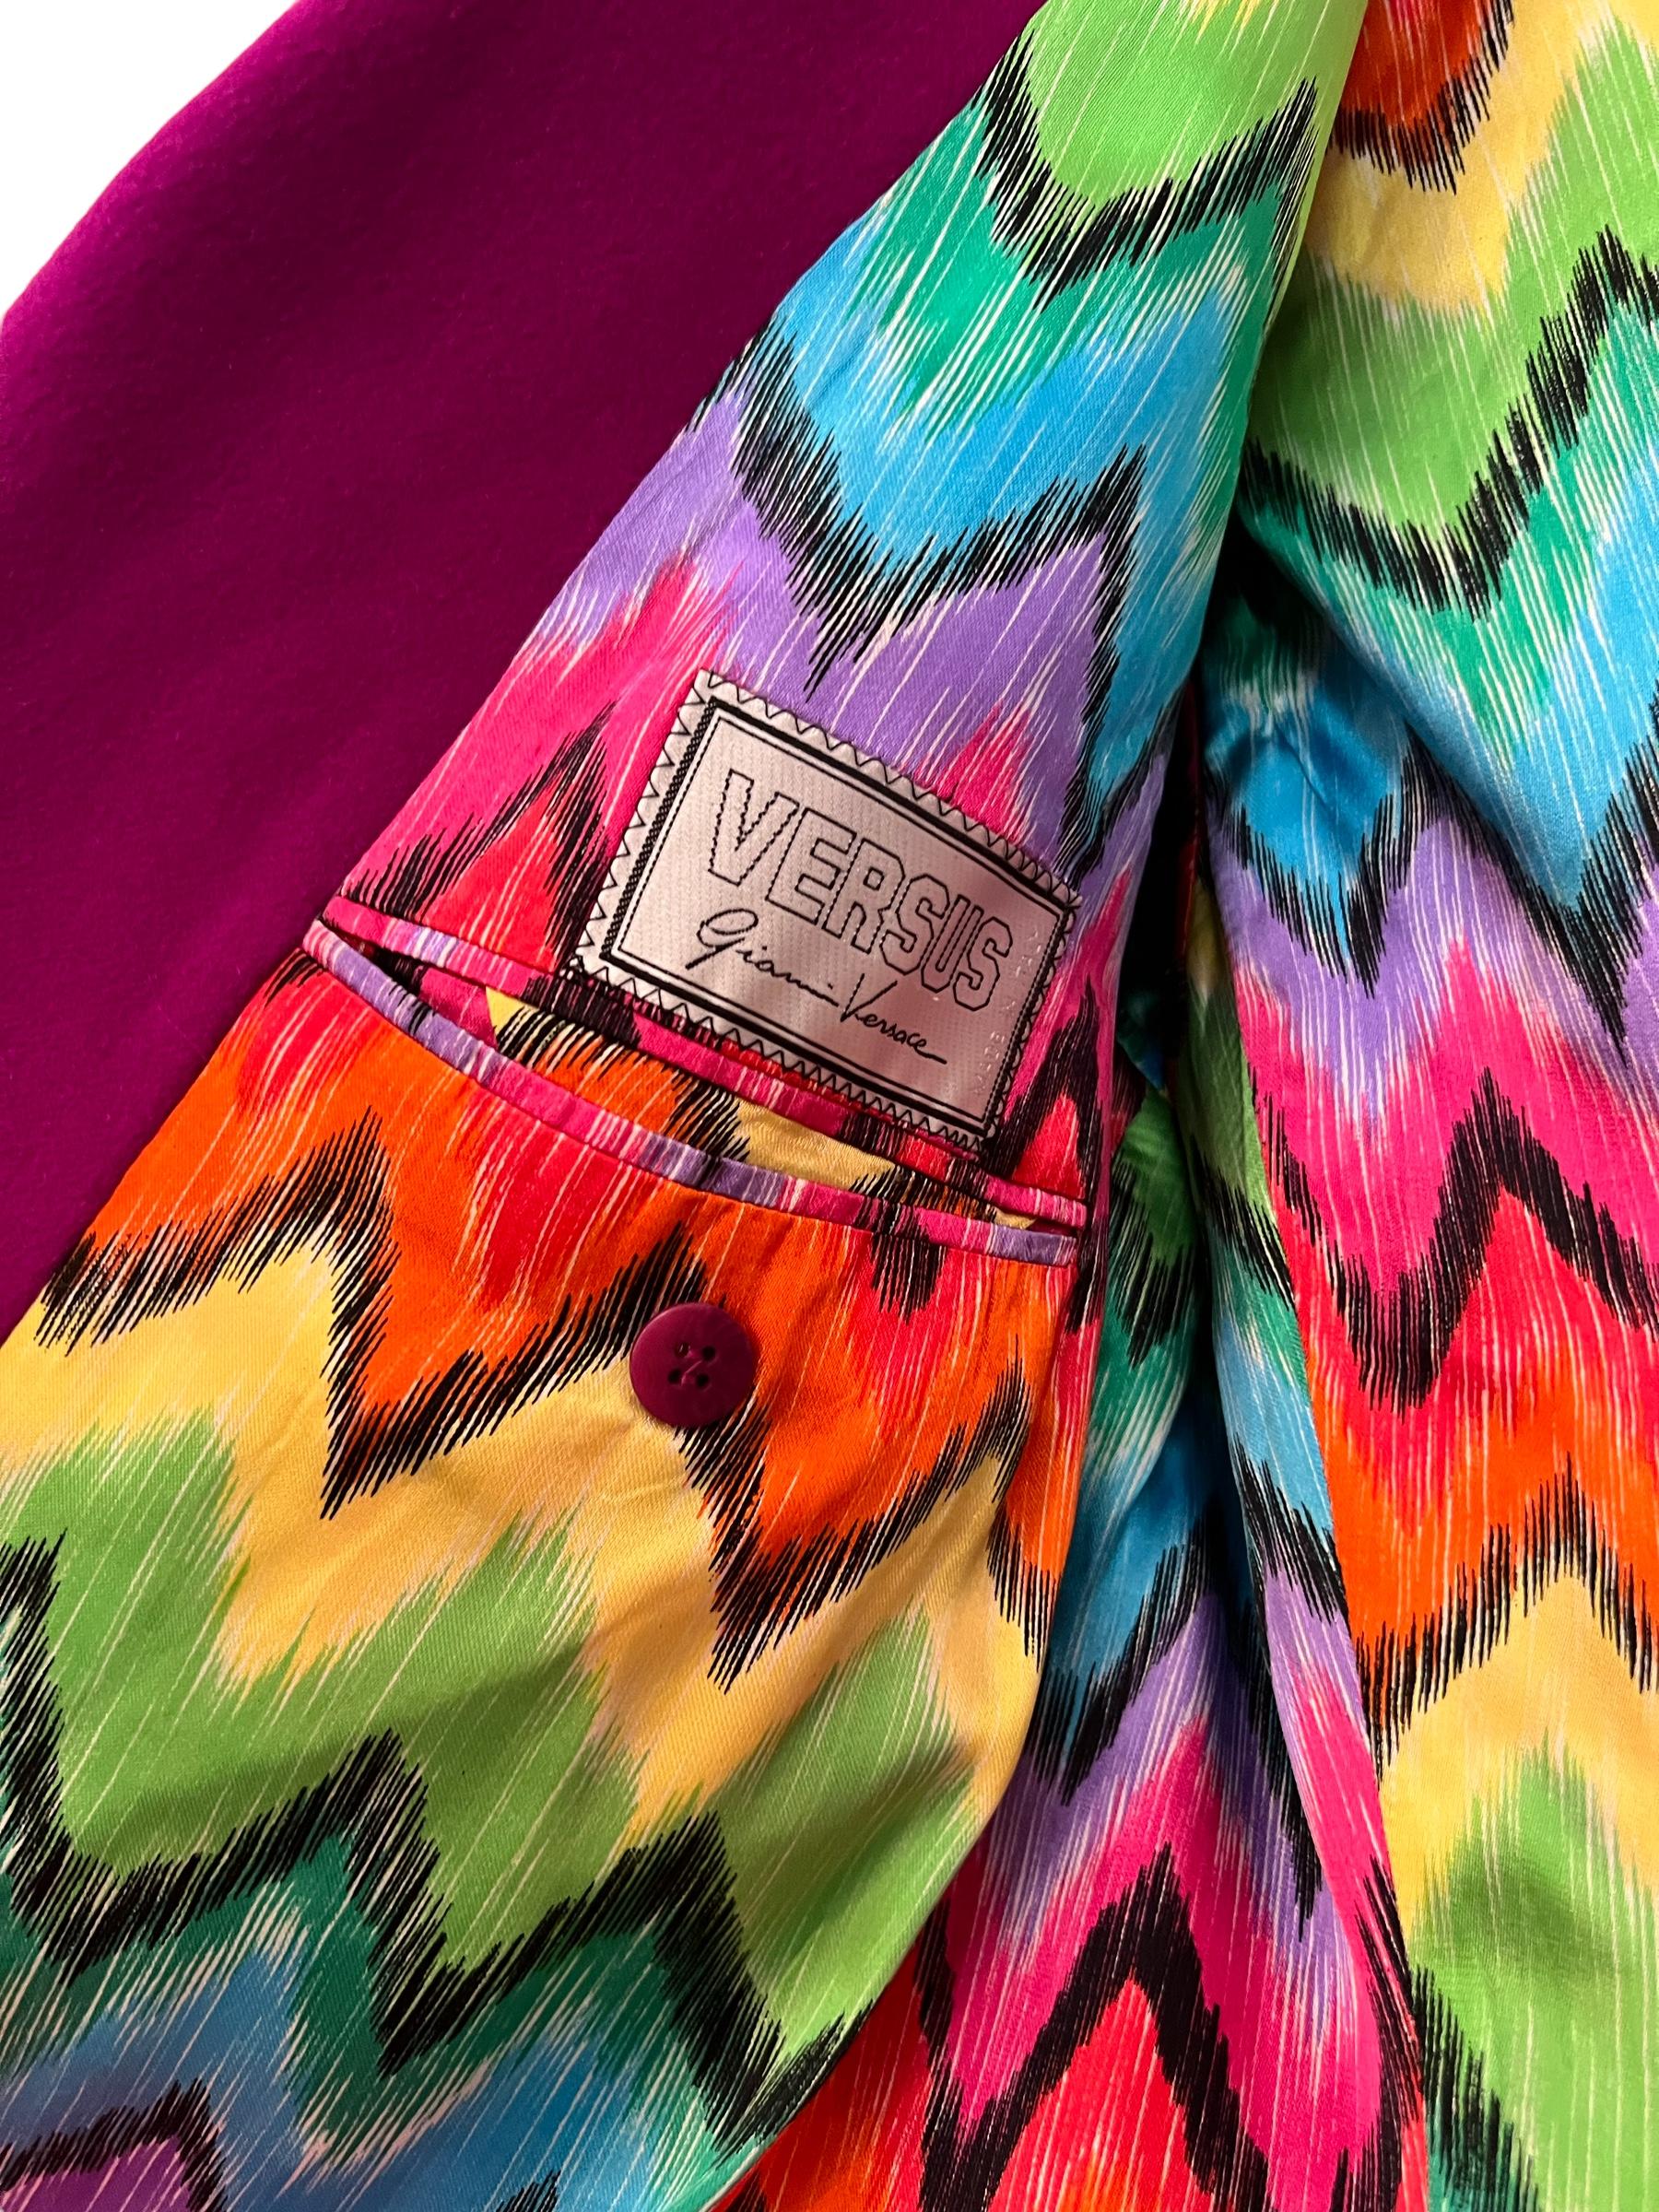 Versus by Gianni Versace Magenta Pink Rainbow Lined Cashmere Blazer Suit Jacket For Sale 9